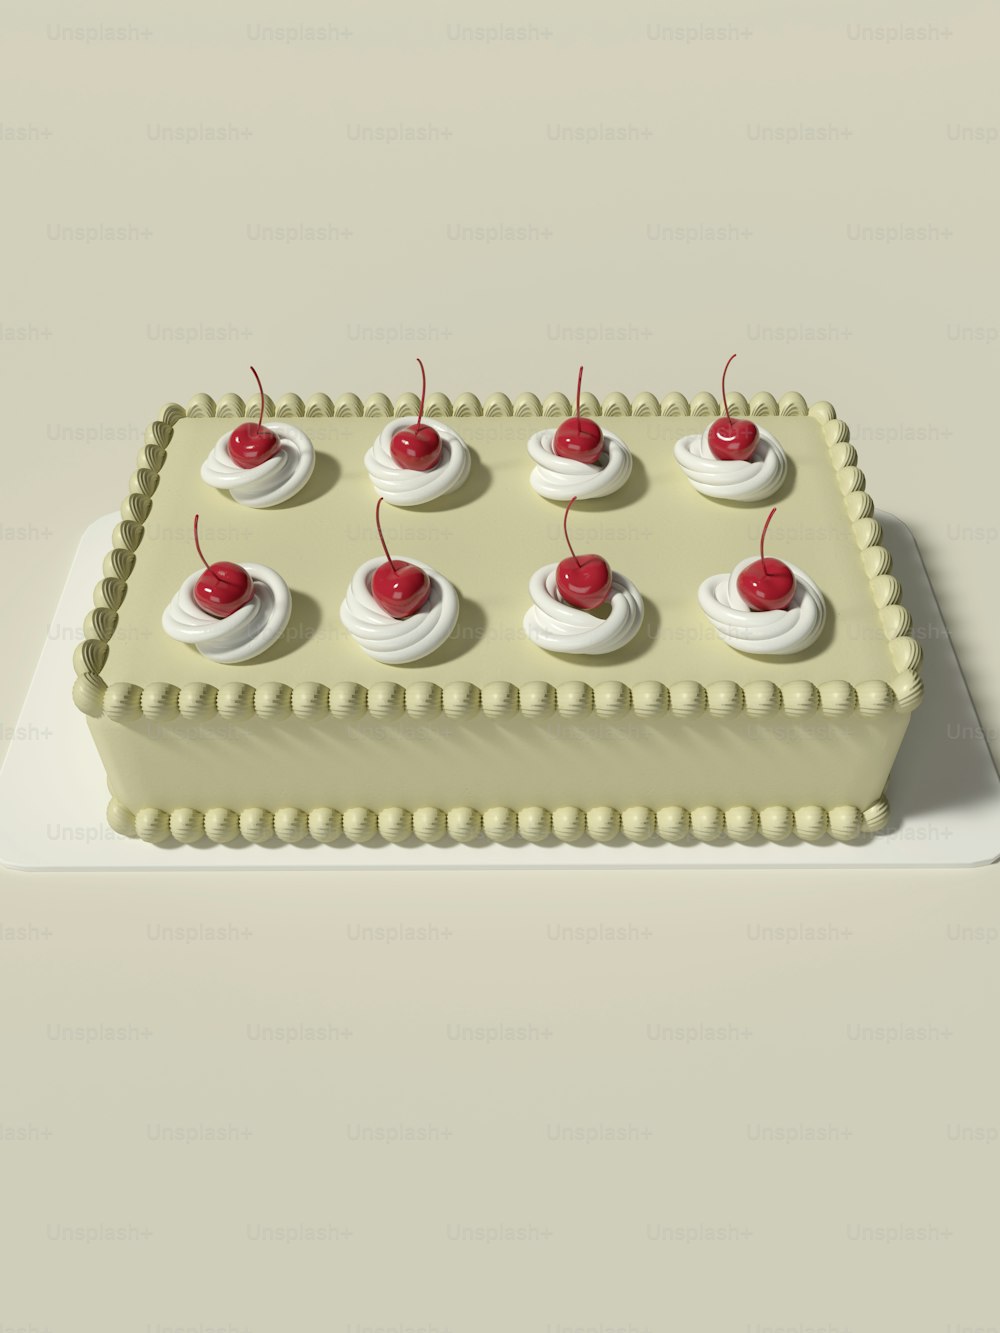 a cake with white frosting and cherries on it